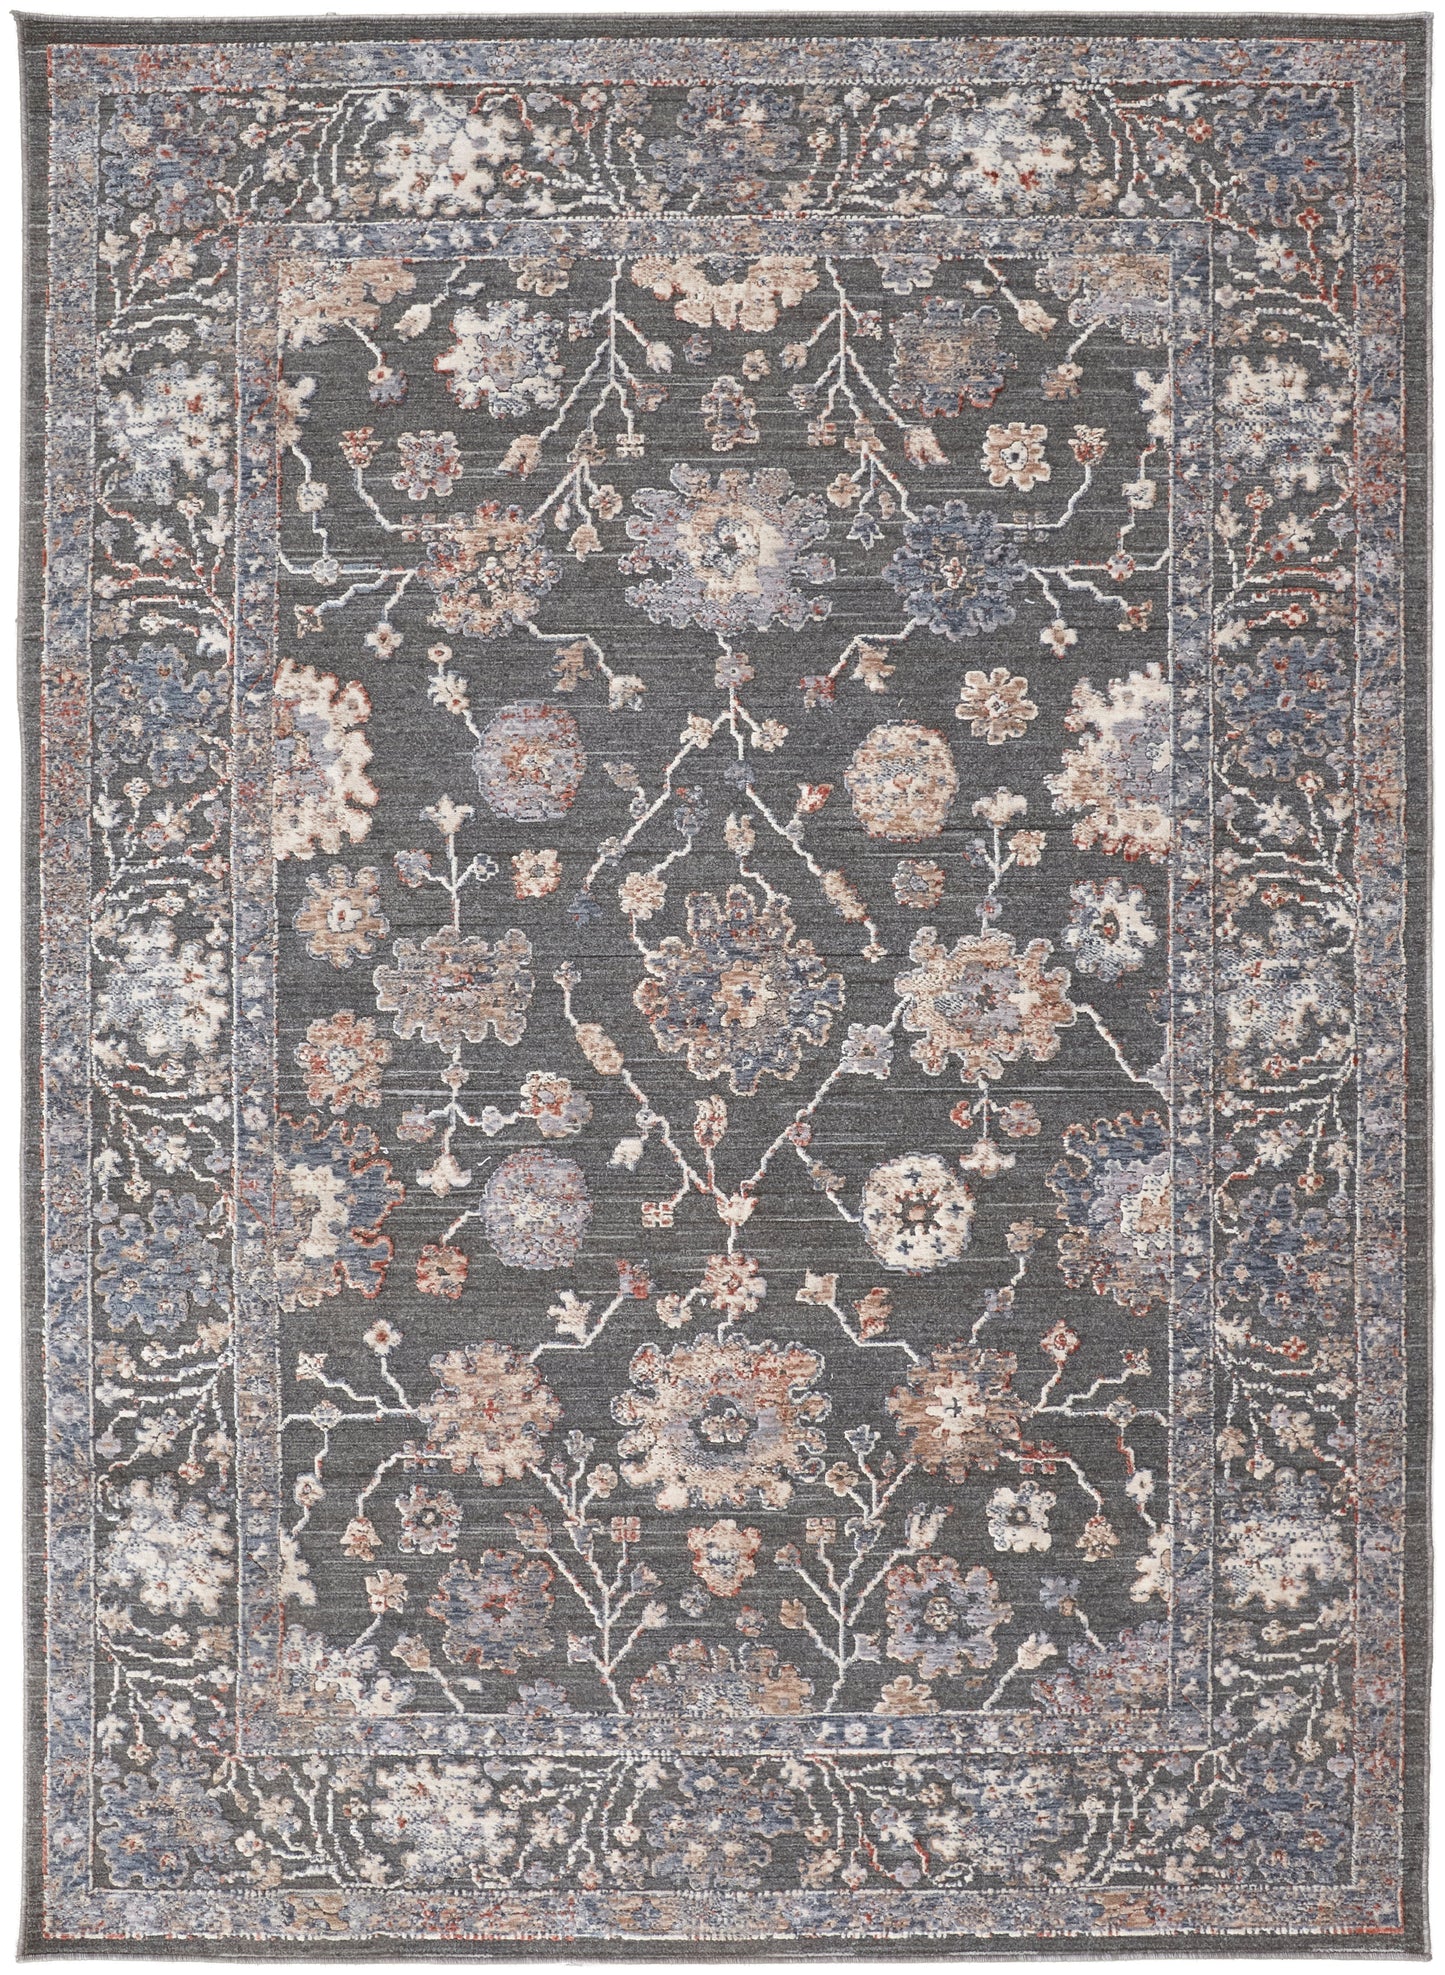 Thackery 39D2F Power Loomed Synthetic Blend Indoor Area Rug by Feizy Rugs